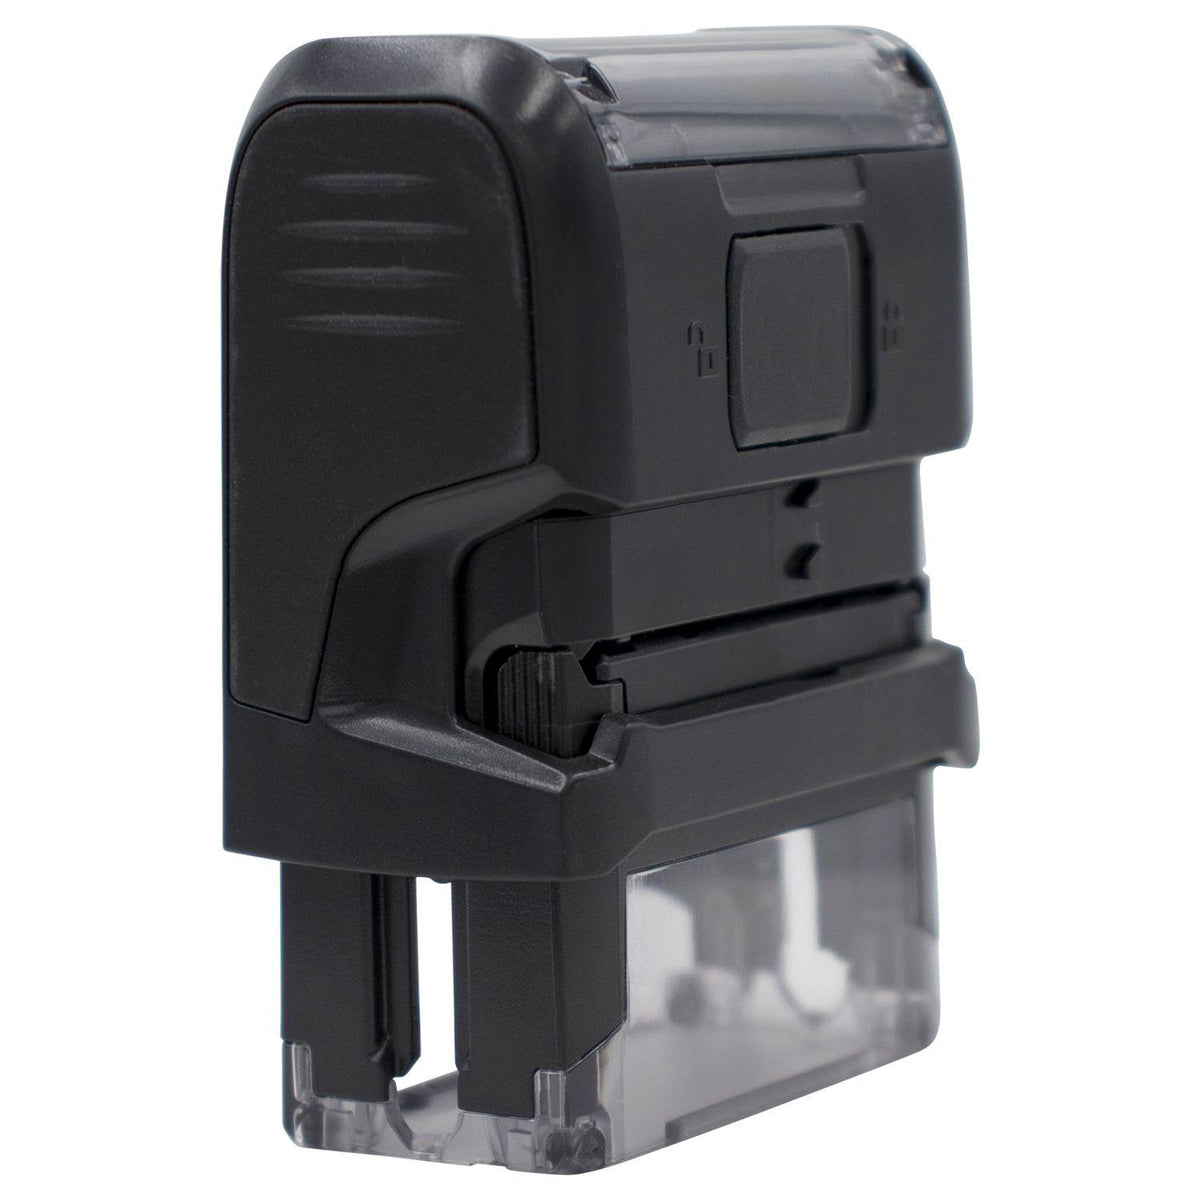 Large Self-Inking Official Stamp - Engineer Seal Stamps - Brand_Trodat, Impression Size_Large, Stamp Type_Self-Inking Stamp, Type of Use_General, Type of Use_Office